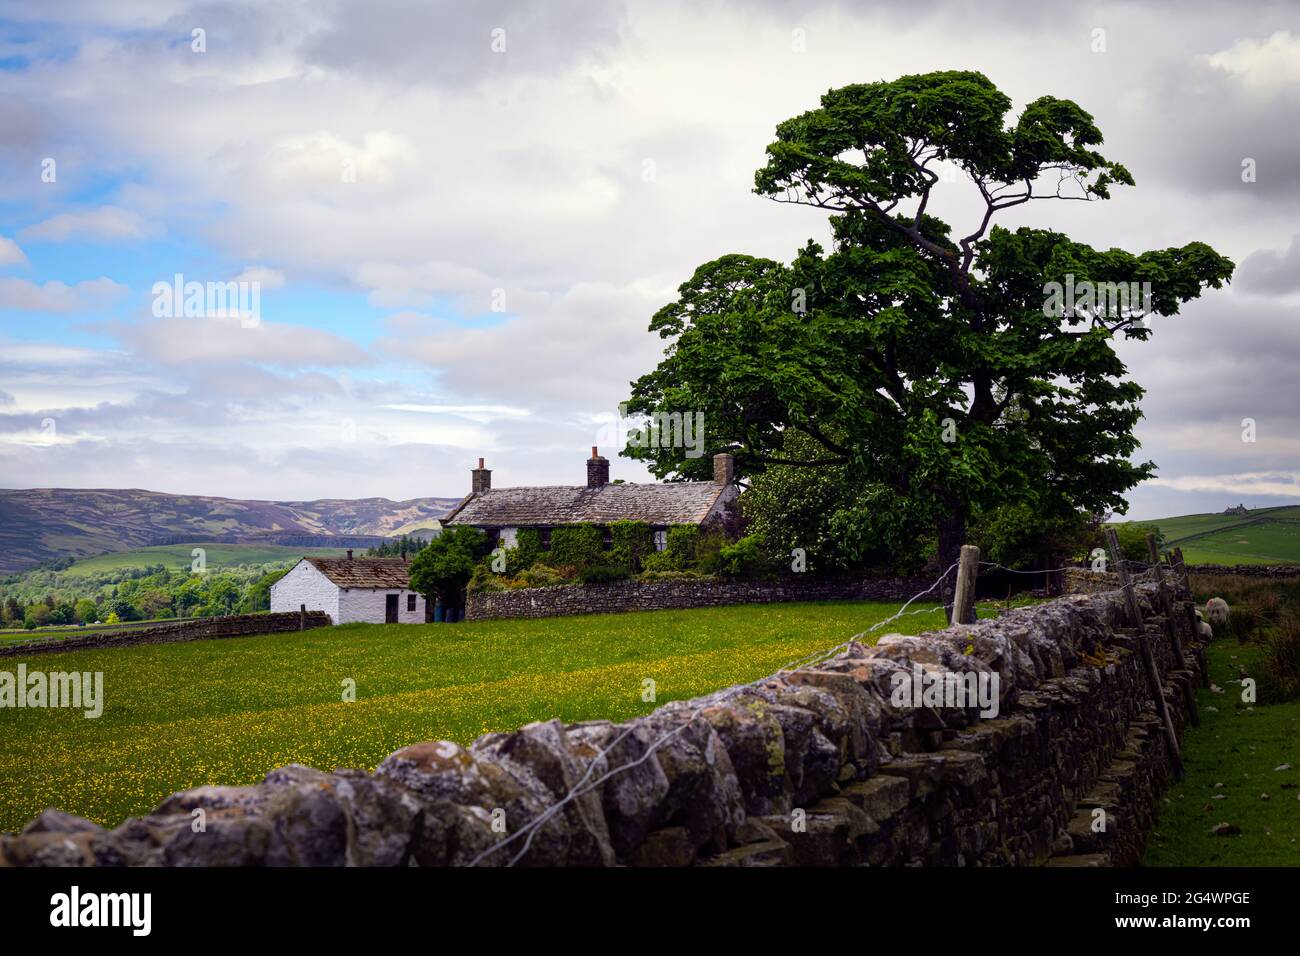 UPPER TEESDALES, ENGLAND - JUNE 9th, 2021: Typical house and whitewashed barn in spring in Upper Teesdale, County Durham, England Stock Photo